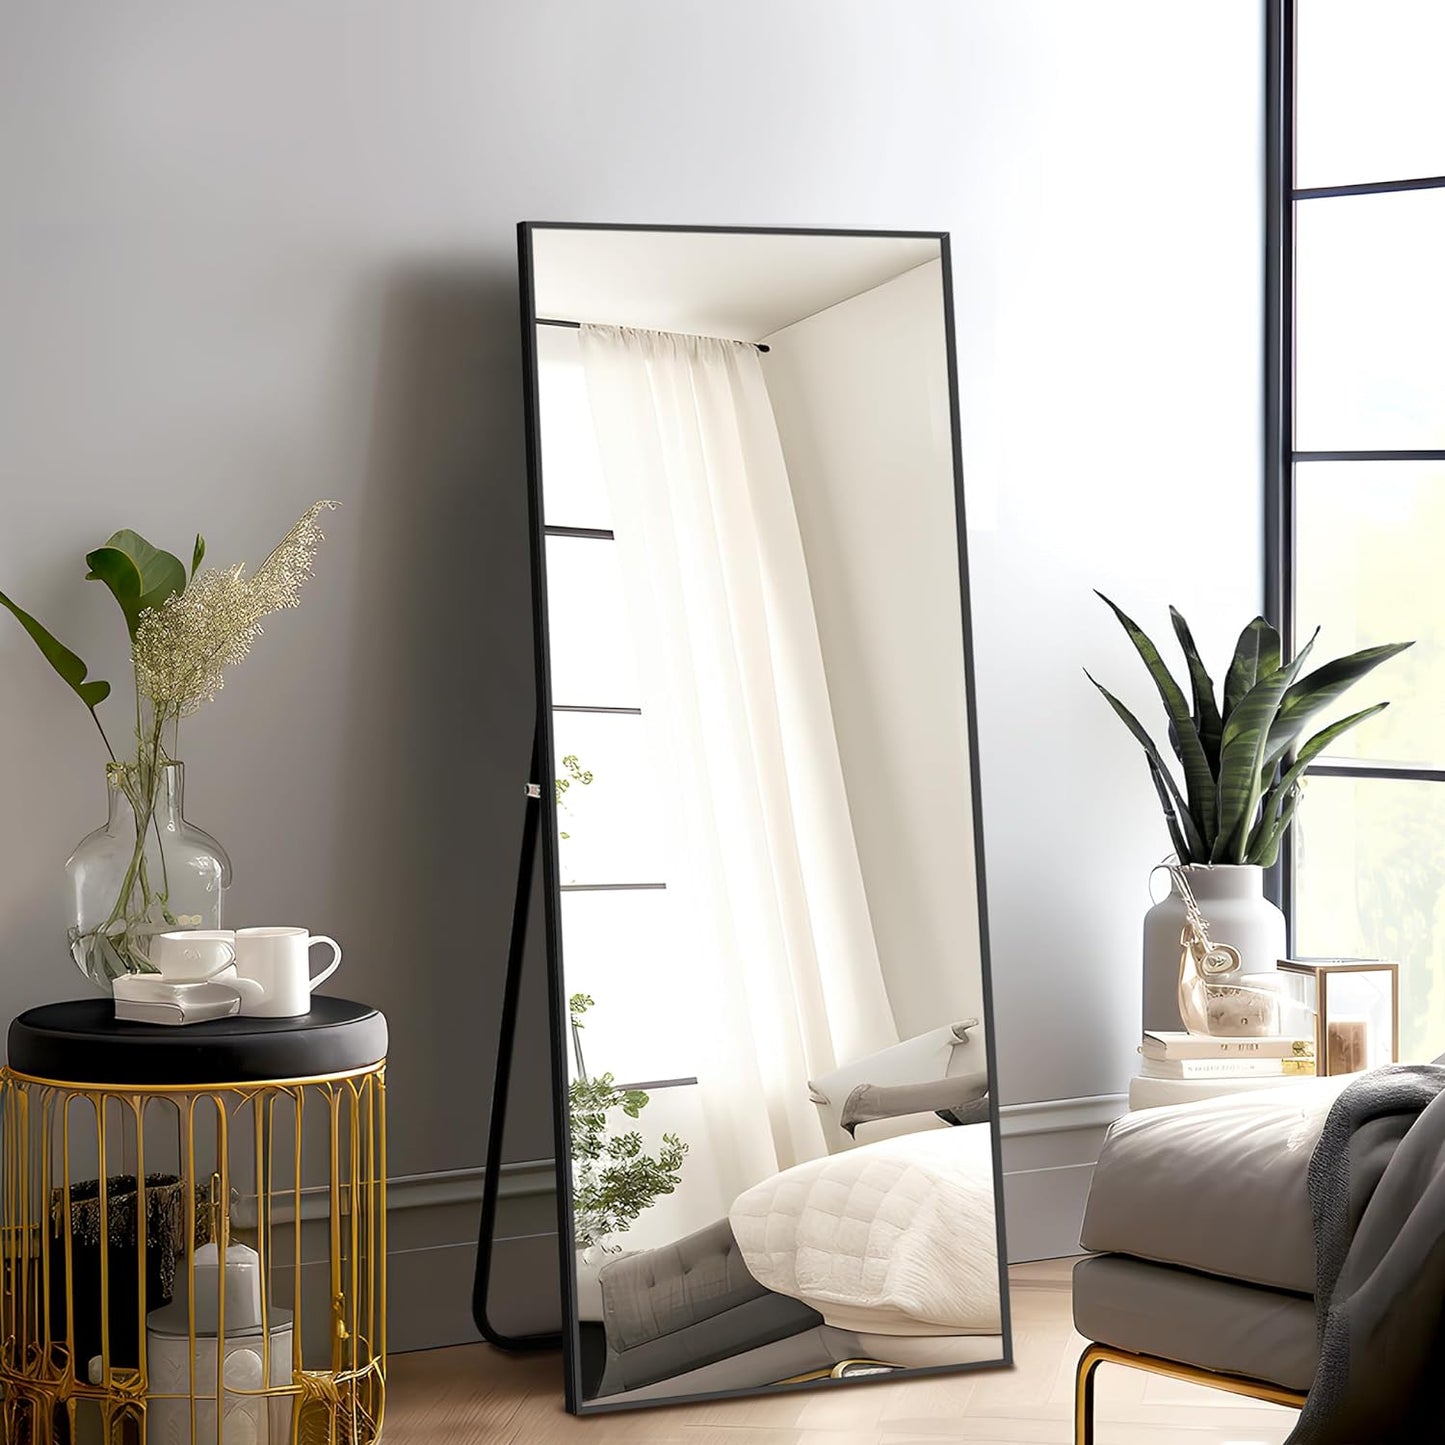 Full Length Mirror with Stand, 56"X19" Aluminum Alloy Frame Floor Mirror, Black, Shatter-Proof Glass - Free Standing, Leaning against Wall or Wall-Mounted, for Bedroom Living Room Dressing Room